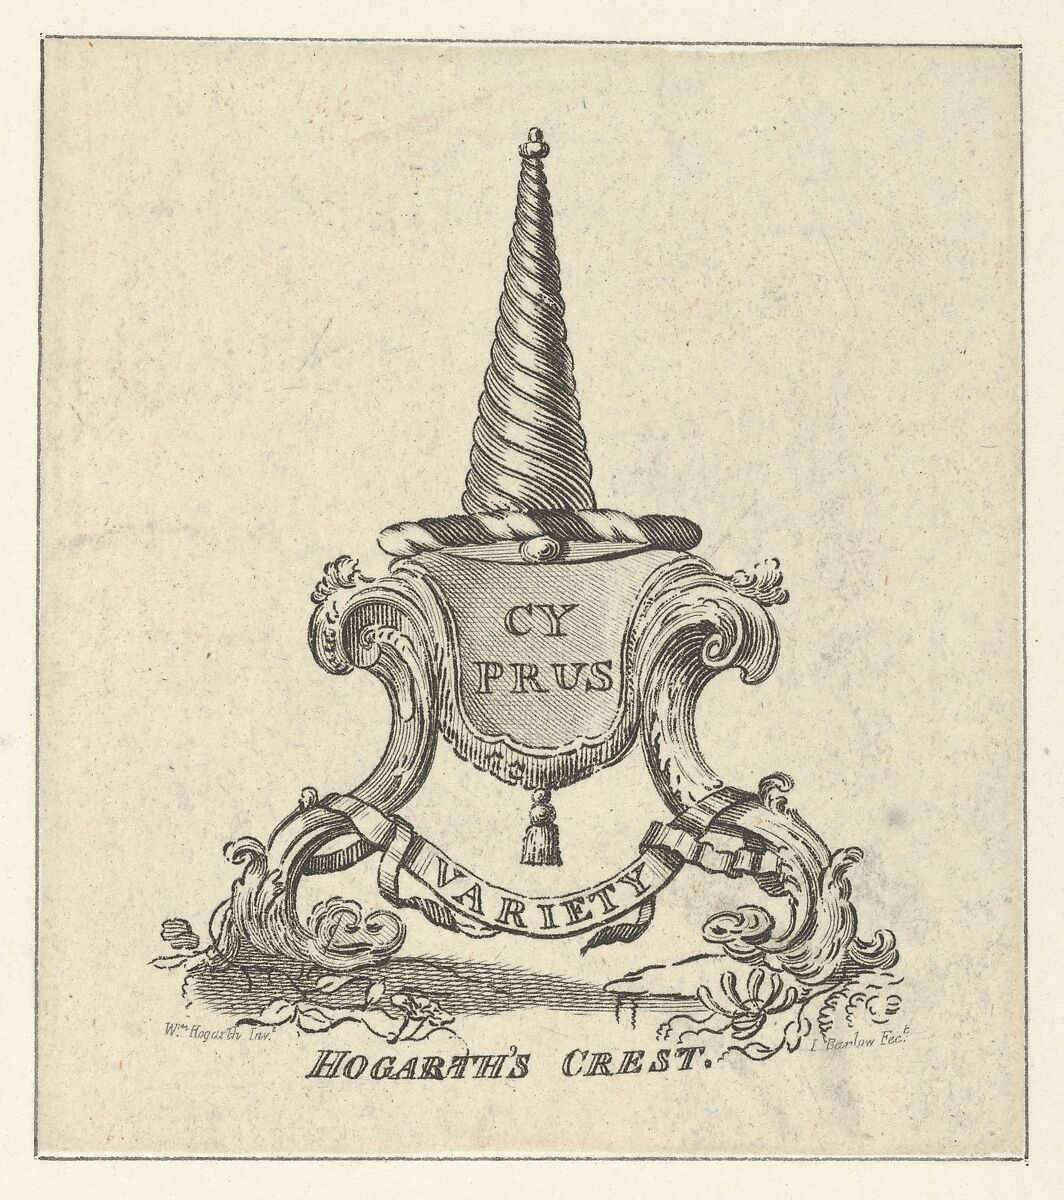 Hogarth's Crest, Attributed to John Barlow (British, 1759/60–1810 or later), Etching and engraving 